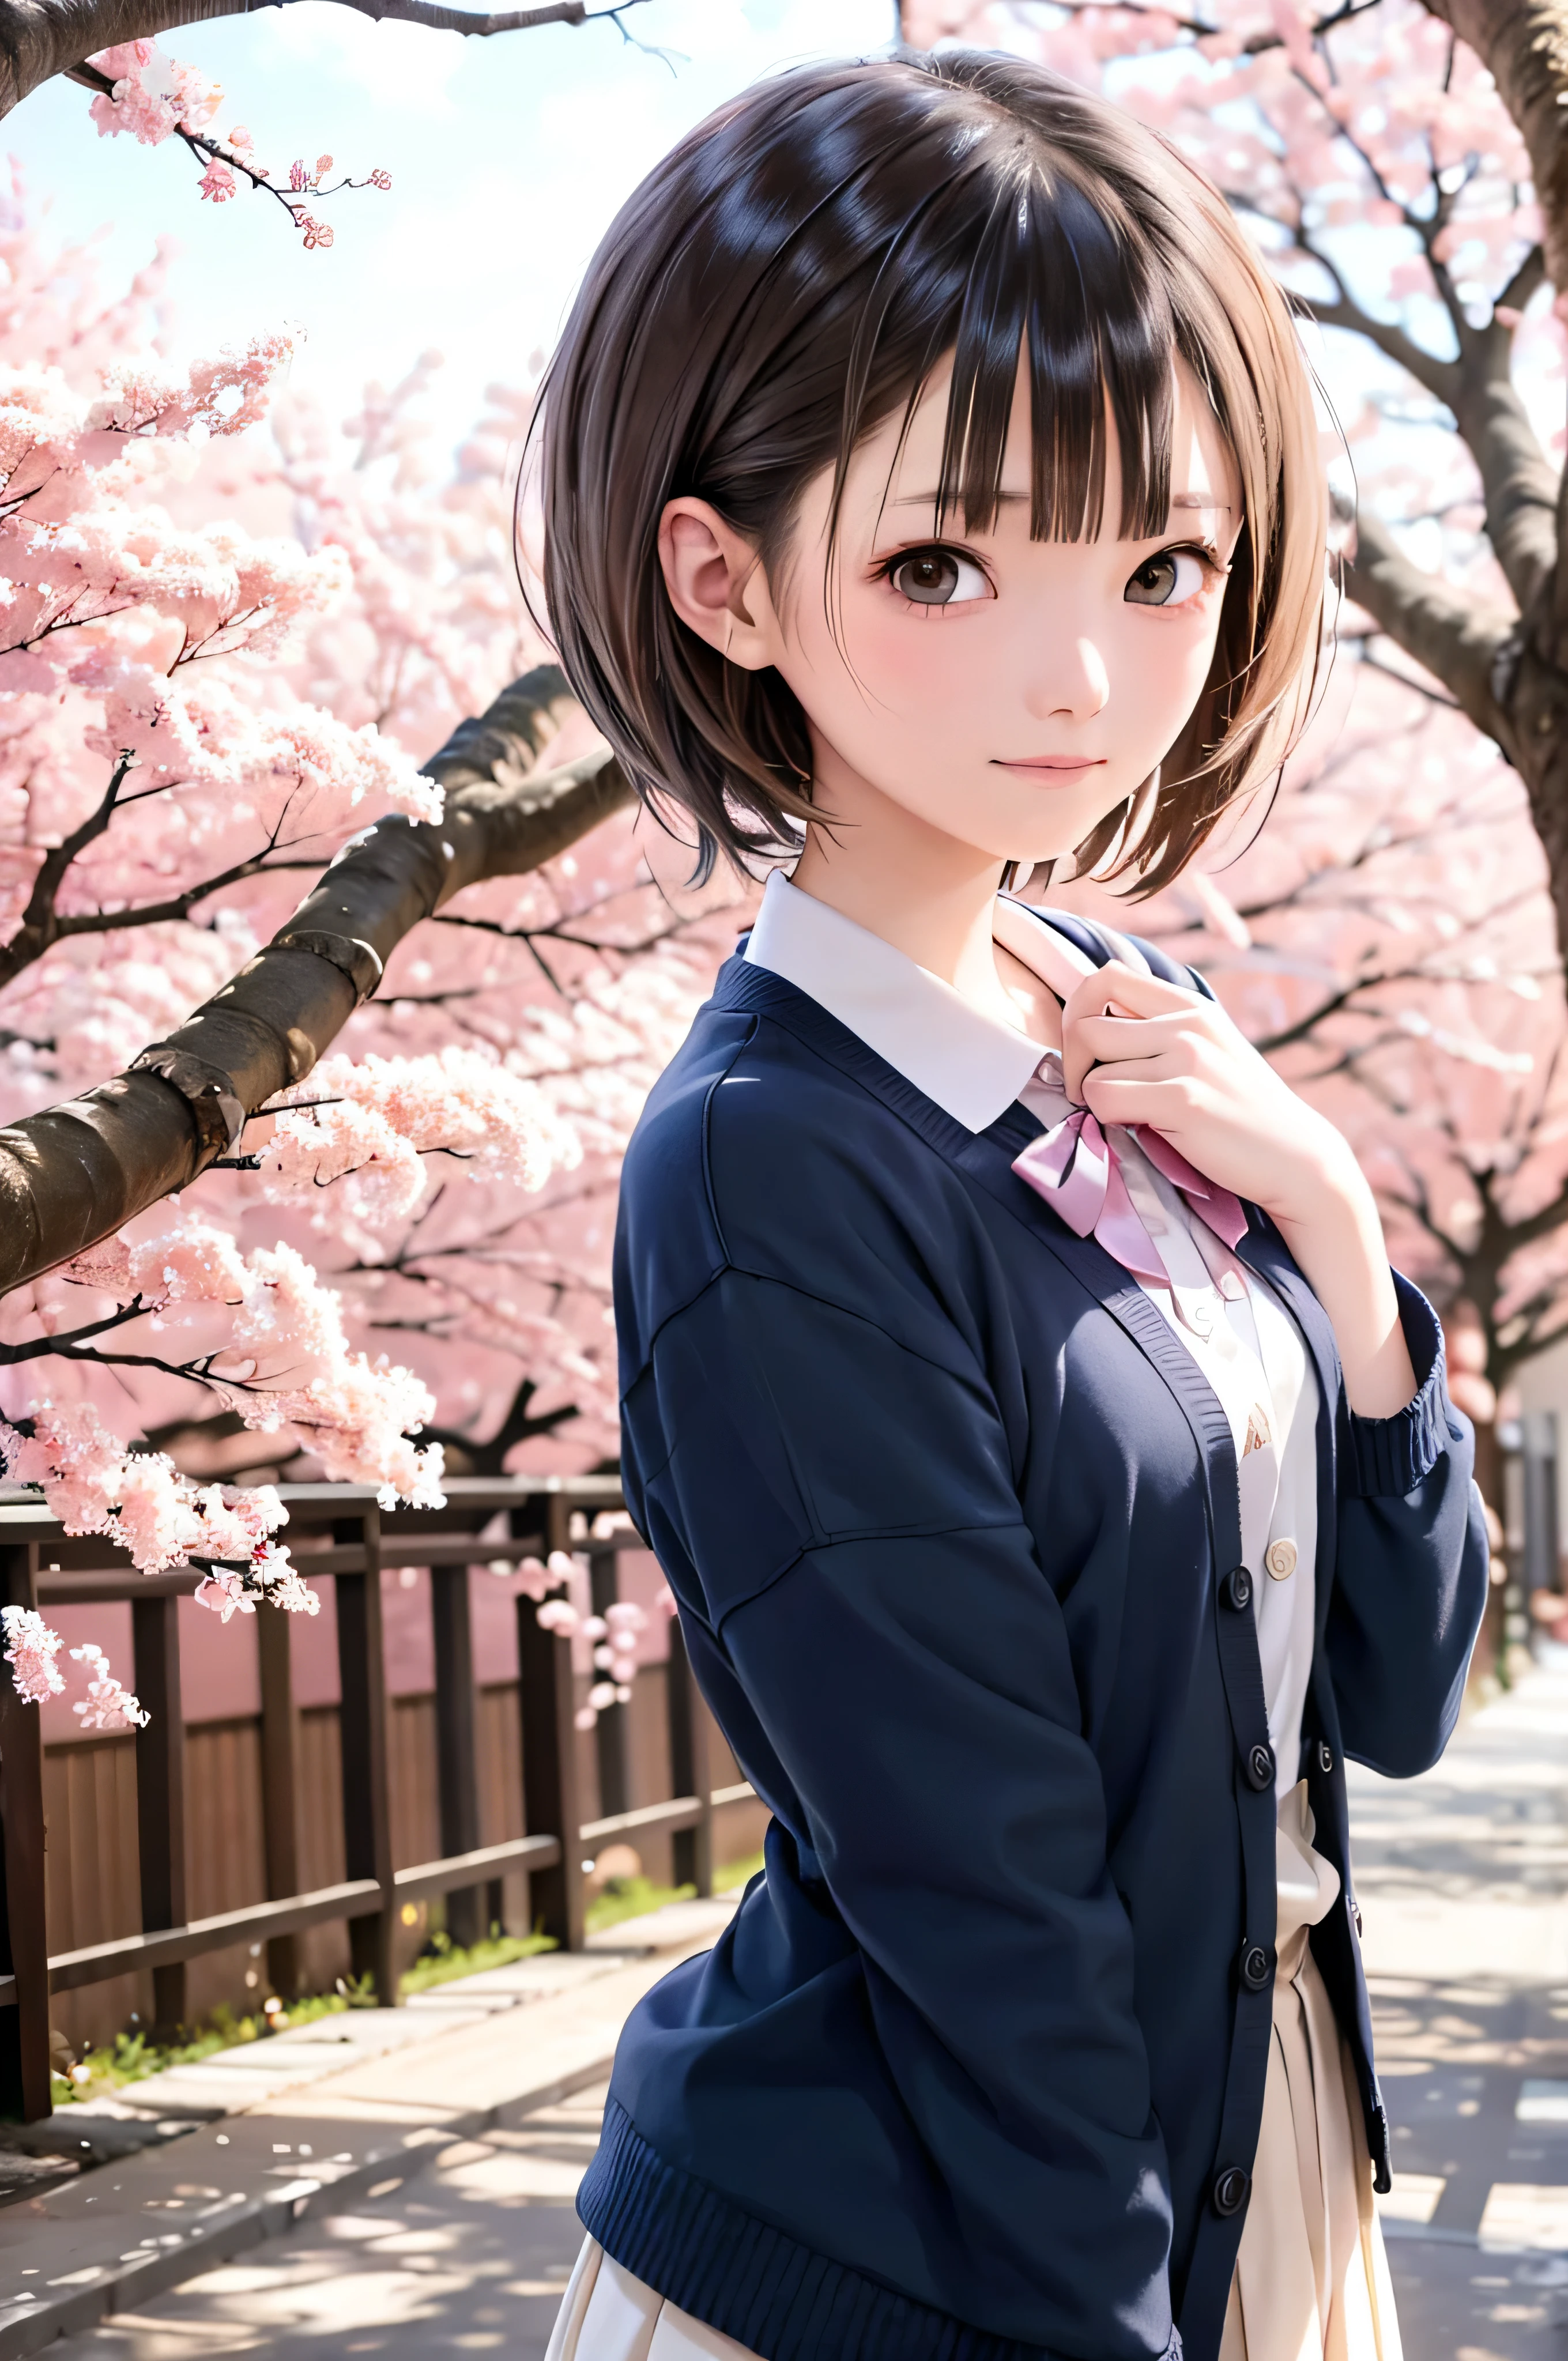 Anime-style portrait of Japanese junior high school girls standing under spring cherry blossoms. she is looking to the side, her long brown hair blows in the wind. The girl has a calm expression, While watching the cherry blossom snowstorm illuminated by soft pink light. her eyes are black and shining, with a subtle smile. She is wearing a Japanese  with a white blouse and a navy blue cardigan。。, Shining in the soft spring sunlight. The girl is depicted small in the frame. in the background, Bright pink cherry blossom branches are blurred. A scene of tranquility, bright, and peaceful atmosphere, Reminds you of the beautiful moments of Japanese anime.